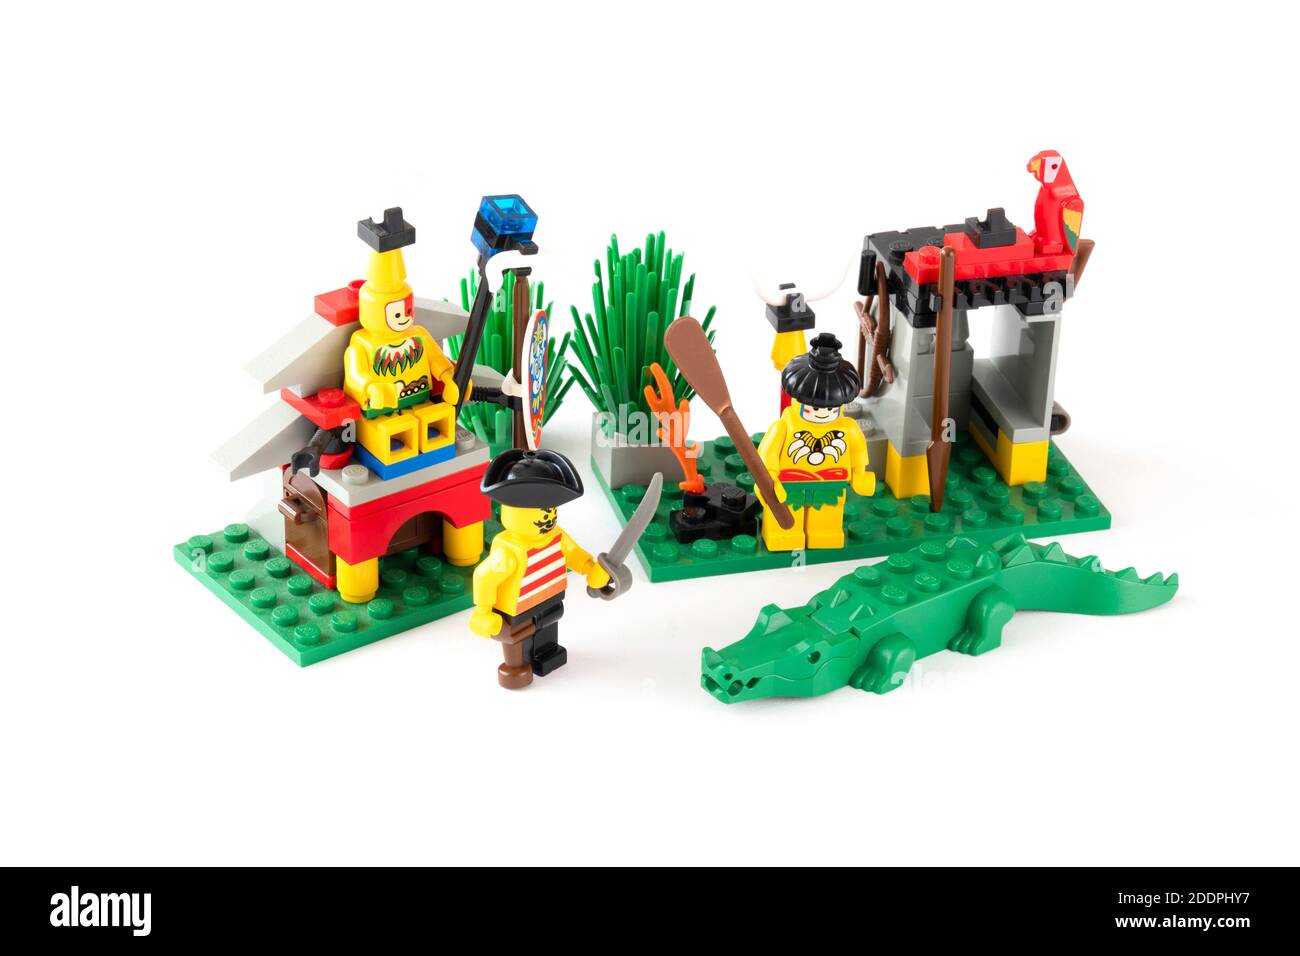 Lego Islanders set from 1990's featuring King Kahuka, pirates and crocodile. Stock Photo